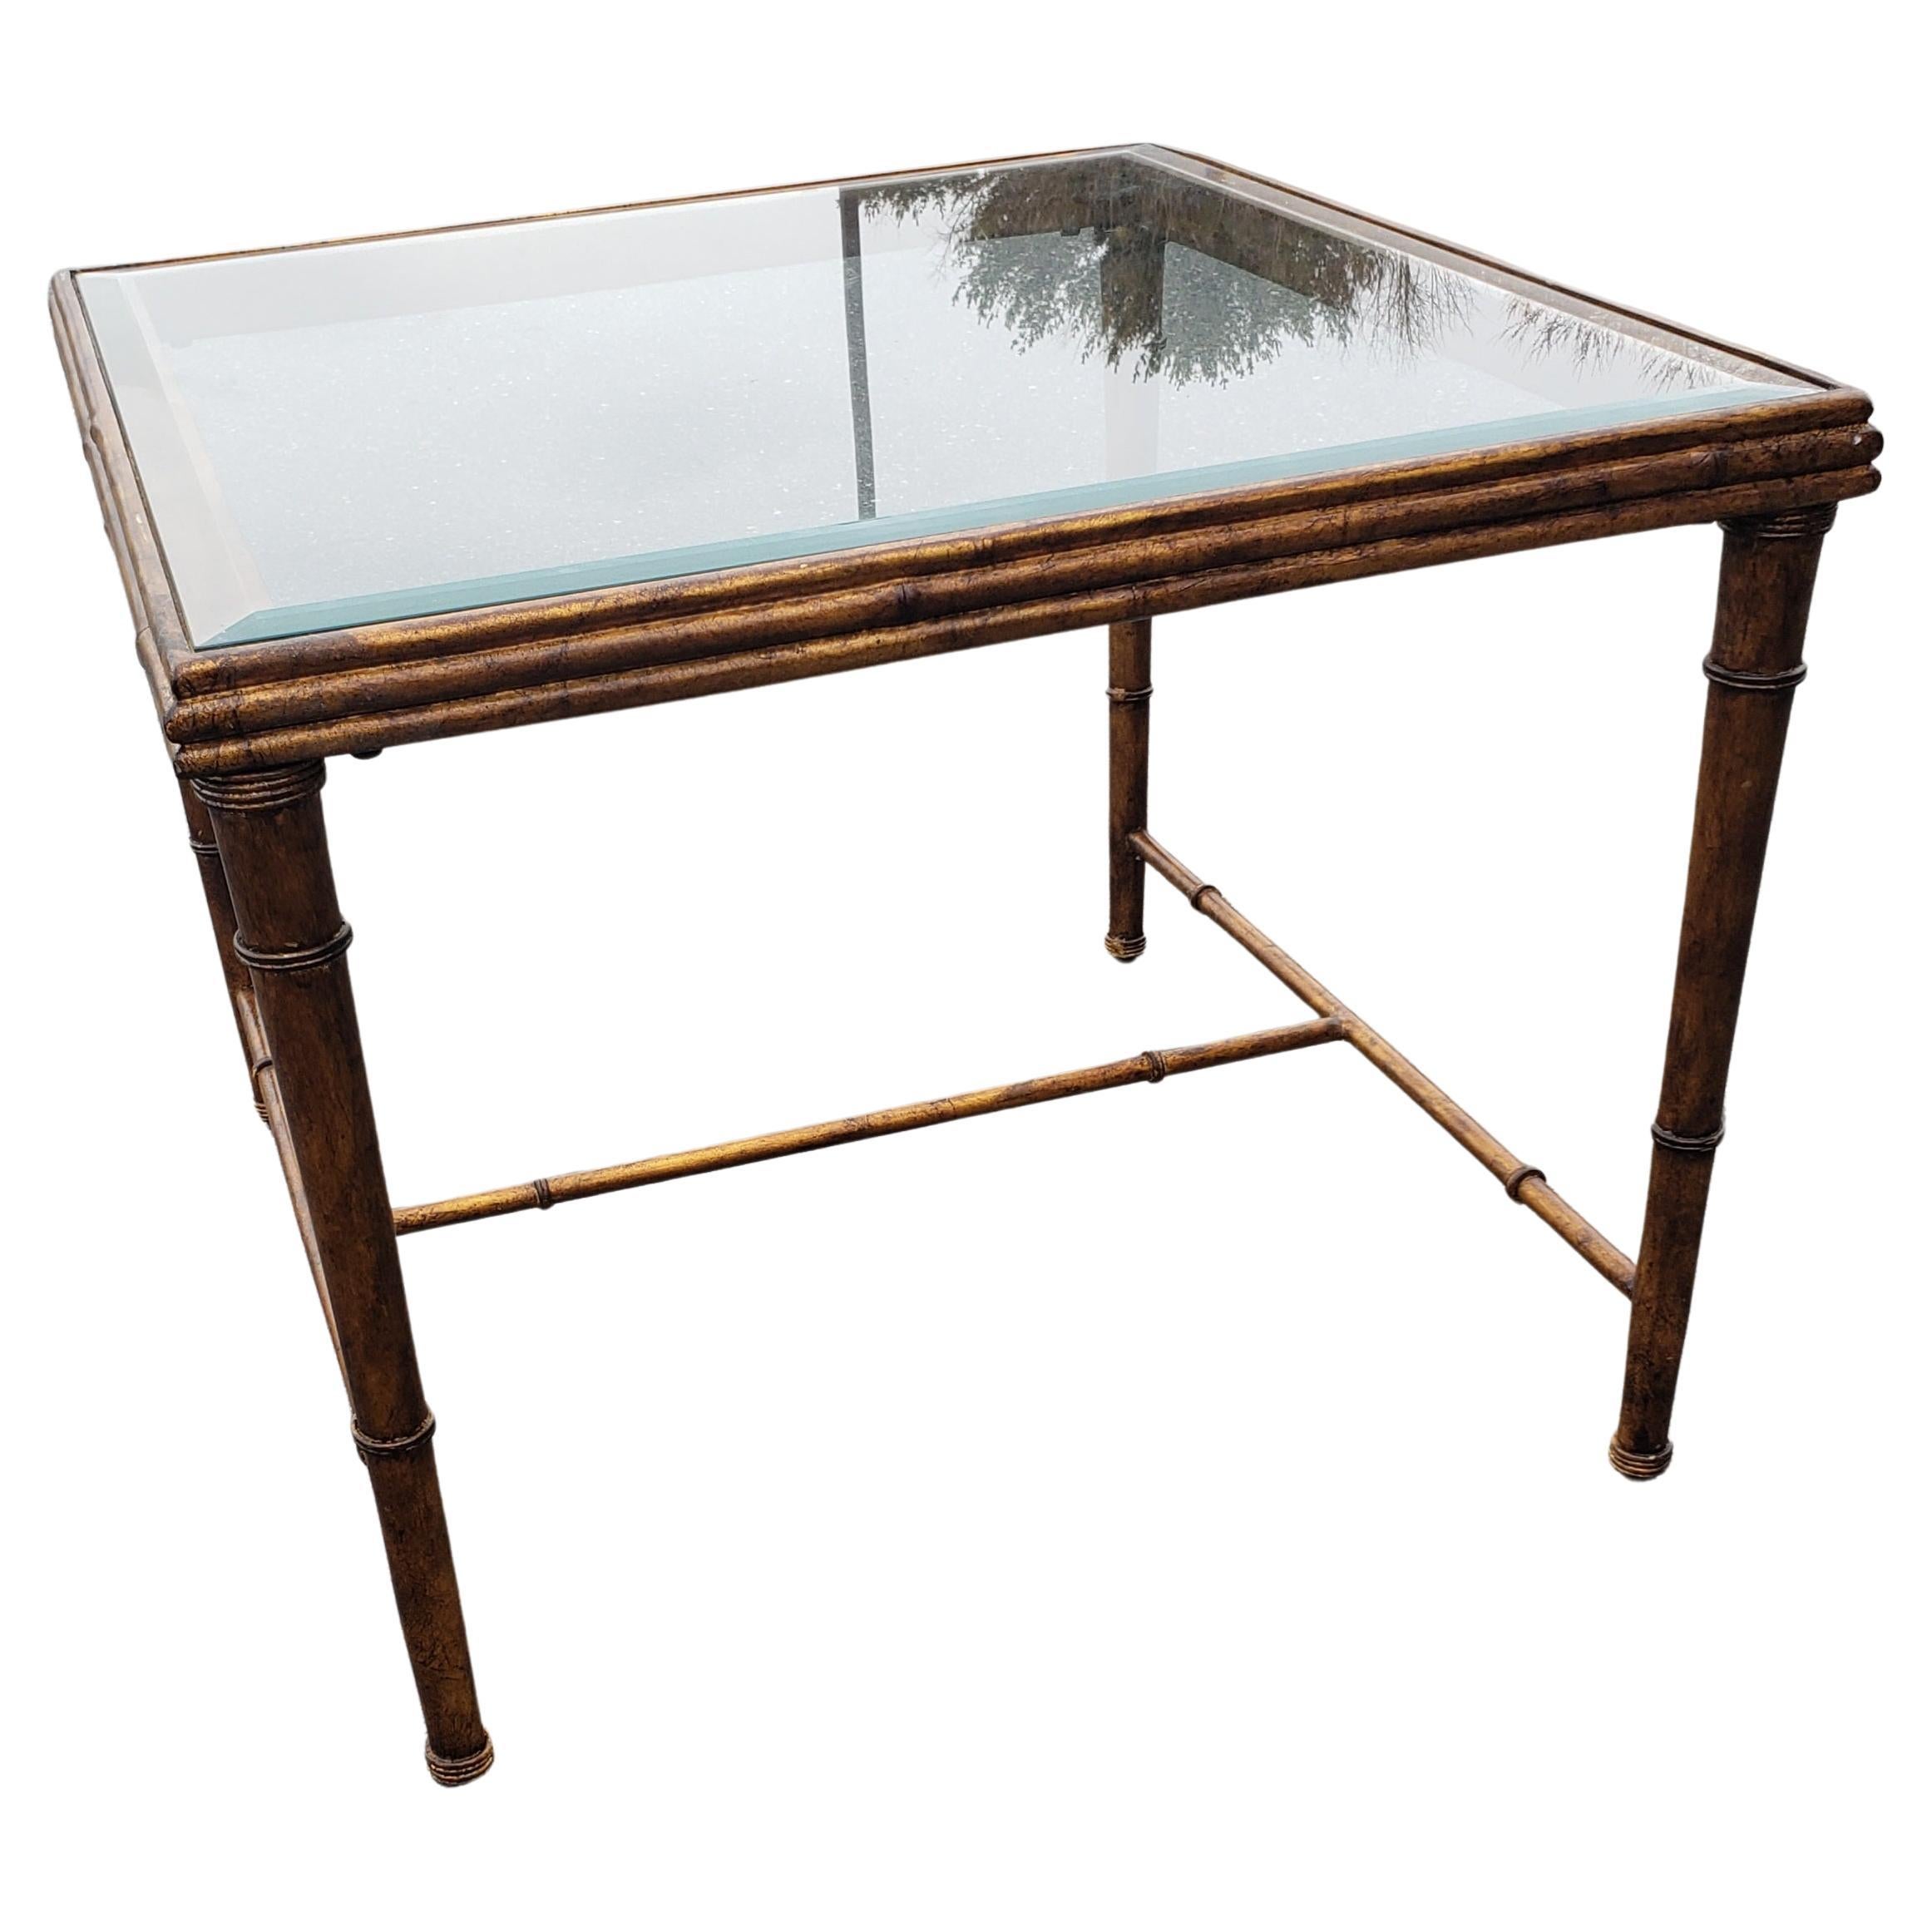 20th Century Hollywood Regency Faux Bamboo Giltwood Metal & Glass Center Table or Side Table For Sale